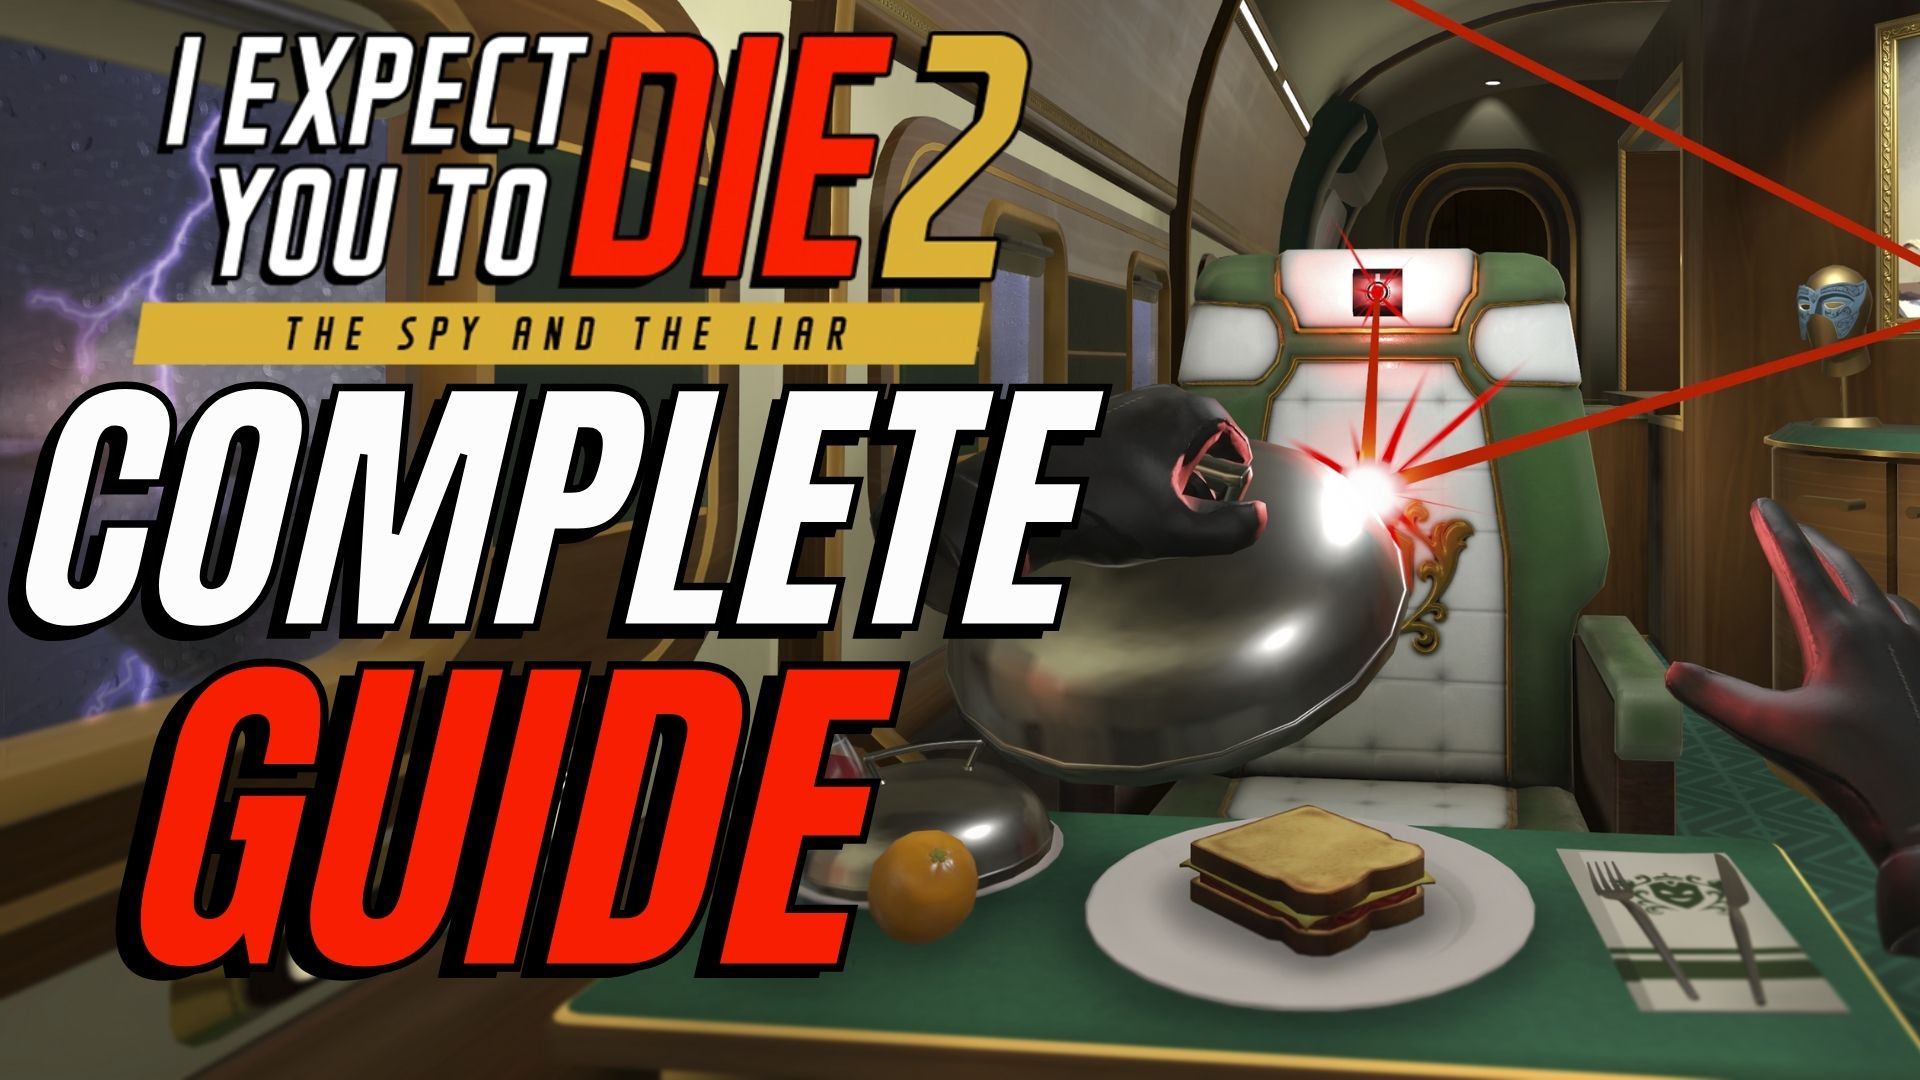 Guide: I Expect You To Die 2 Complete Walkthrough